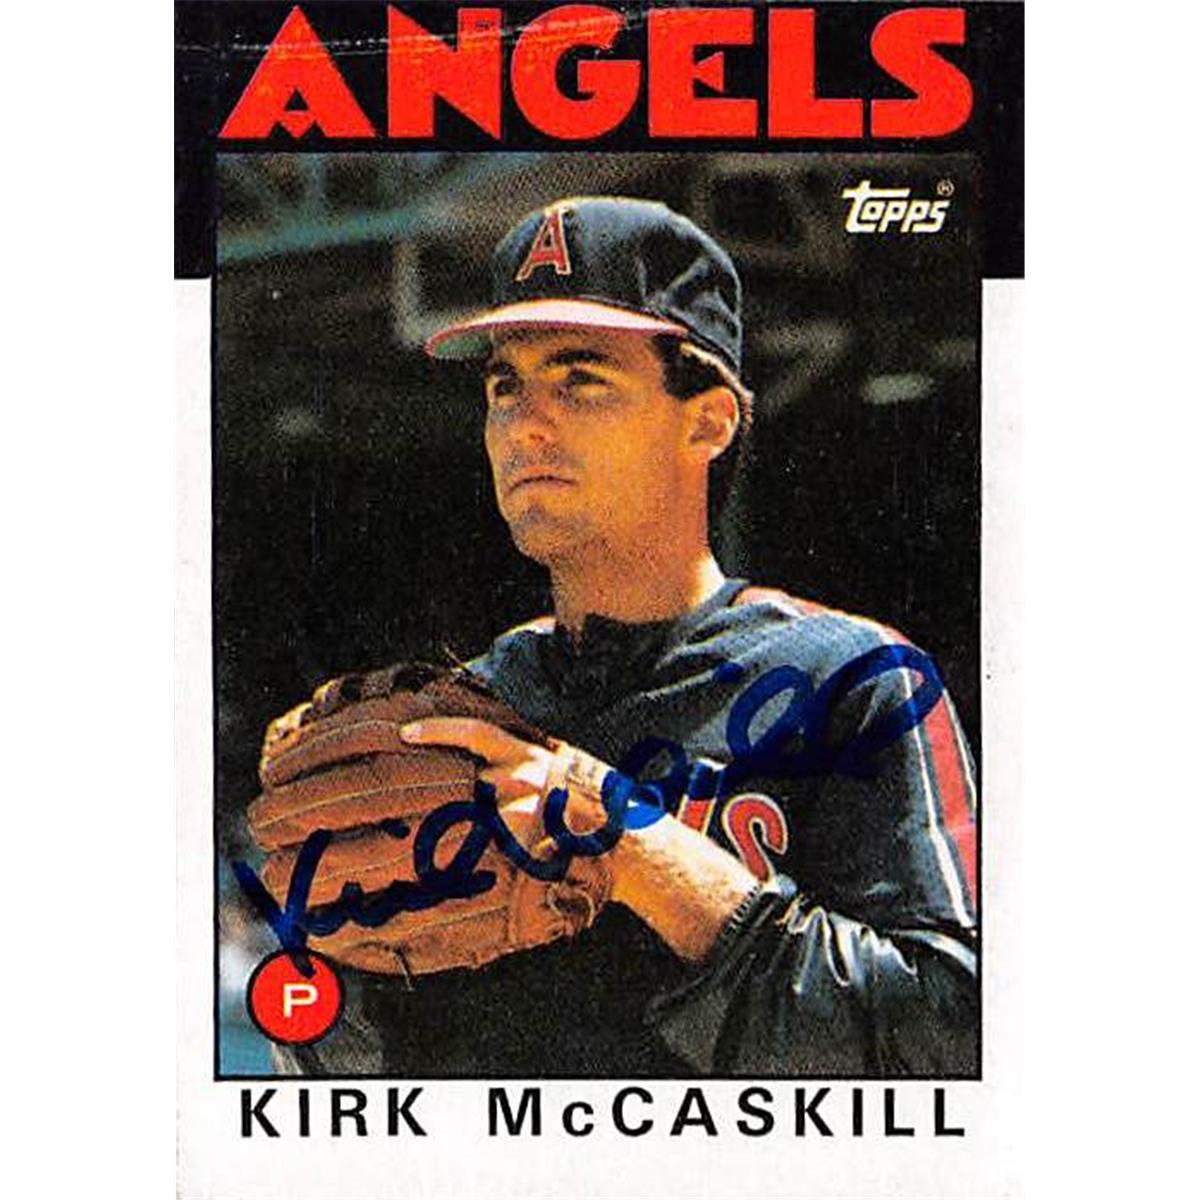 Picture of Autograph Warehouse 365323 Kirk Mccaskill Autographed Baseball Card - California Angels 67 1986 Topps No.628 small upper crease